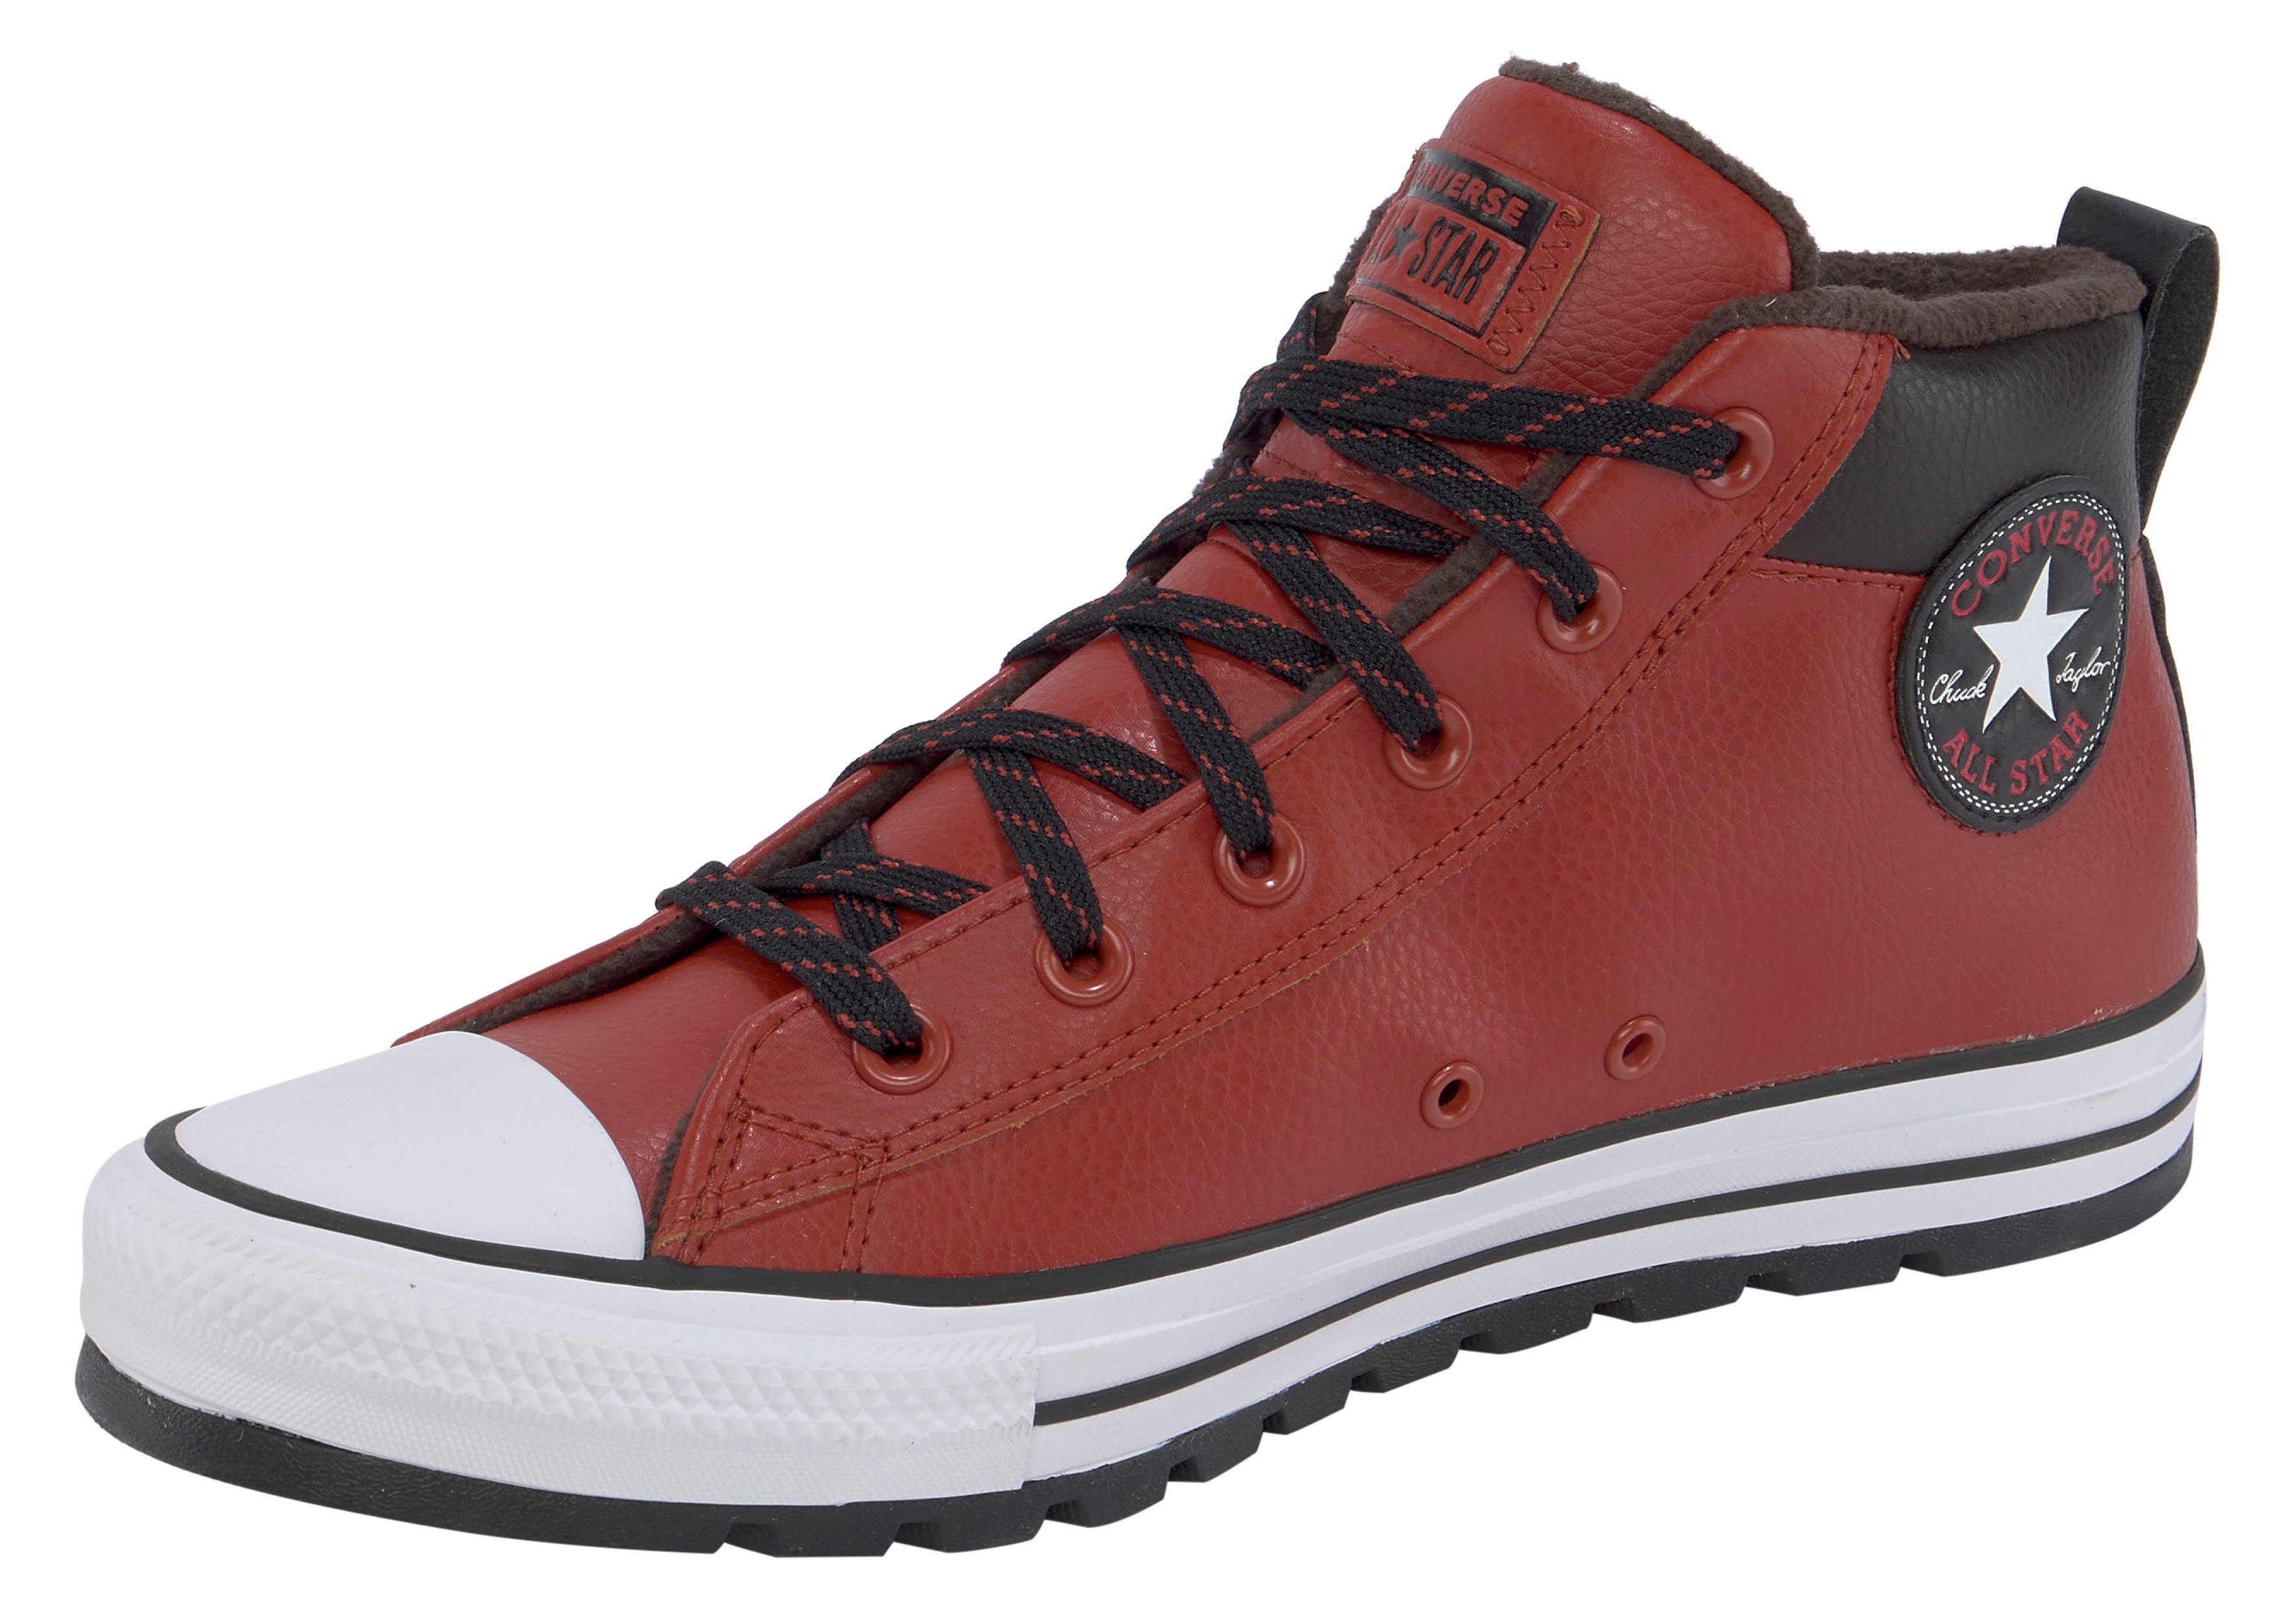 Converse »CHUCK TAYLOR ALL STAR STREET LUGGED« Sneaker online kaufen | OTTO